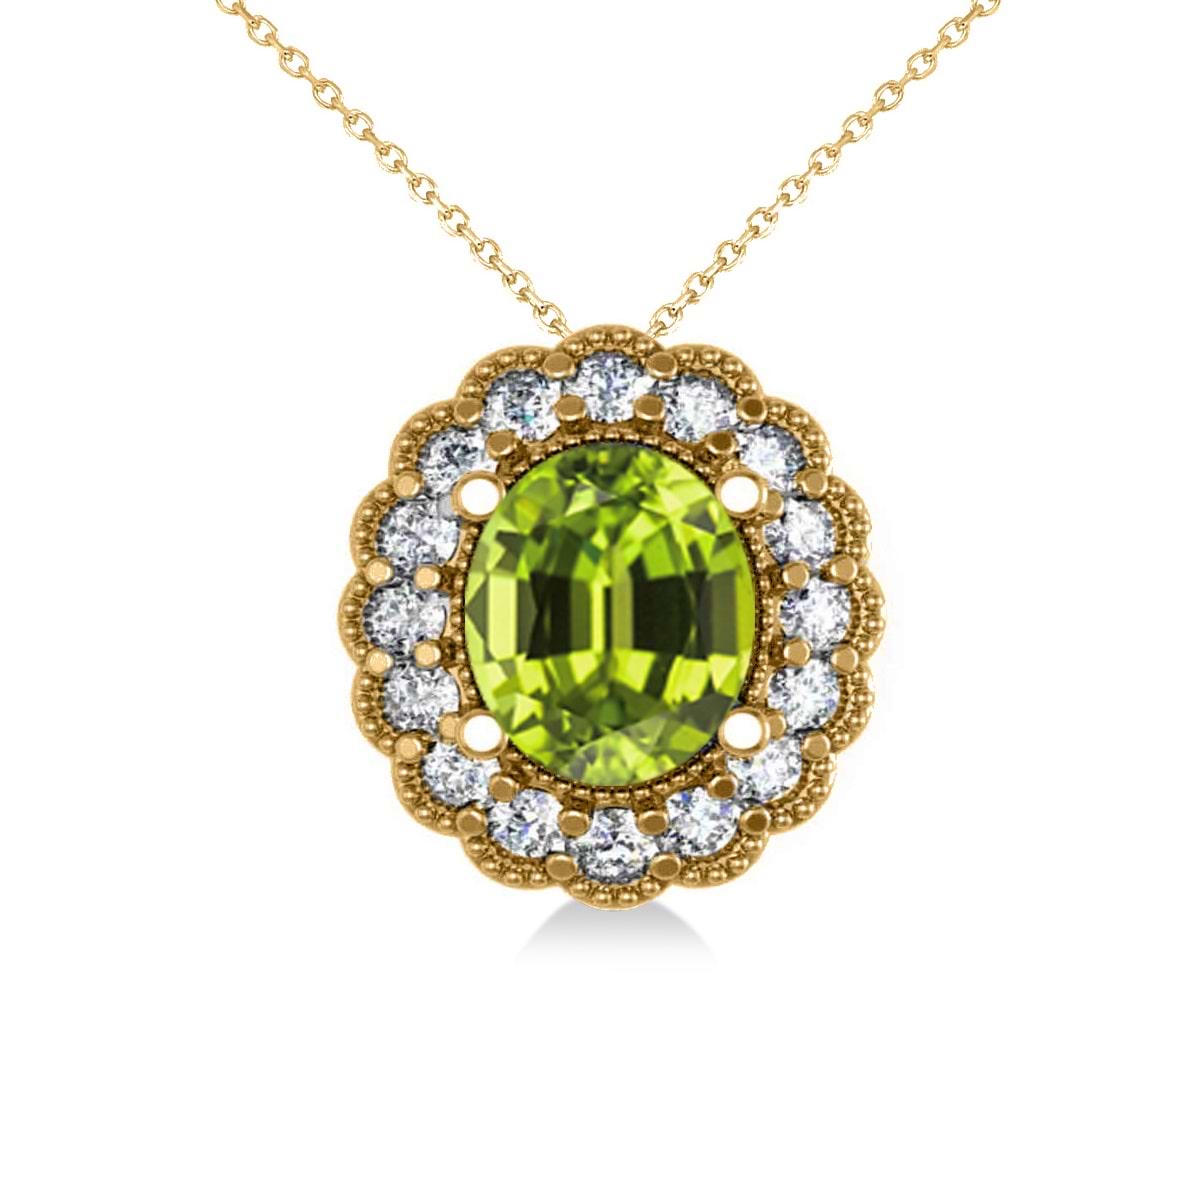 Peridot & Diamond Floral Oval Pendant Necklace 14k Yellow Gold (2.98ct)